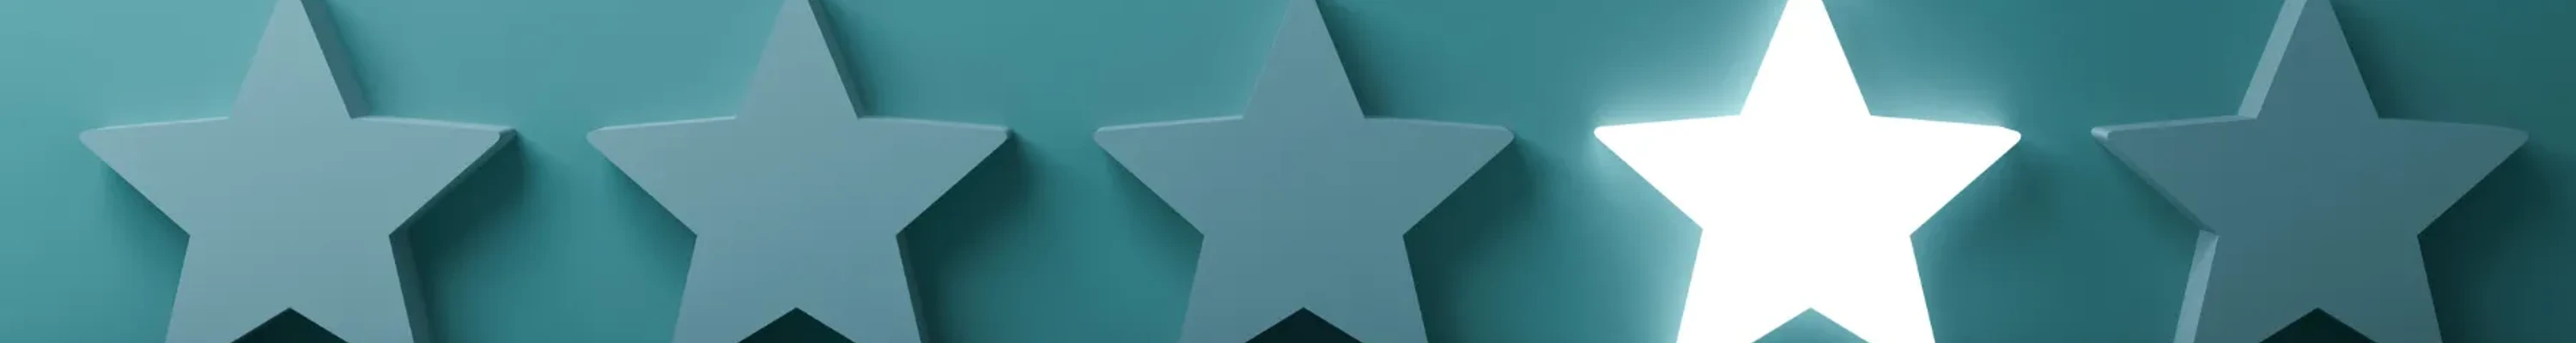 row of 5 stars. Four are blue colour similar to background and one is bright white